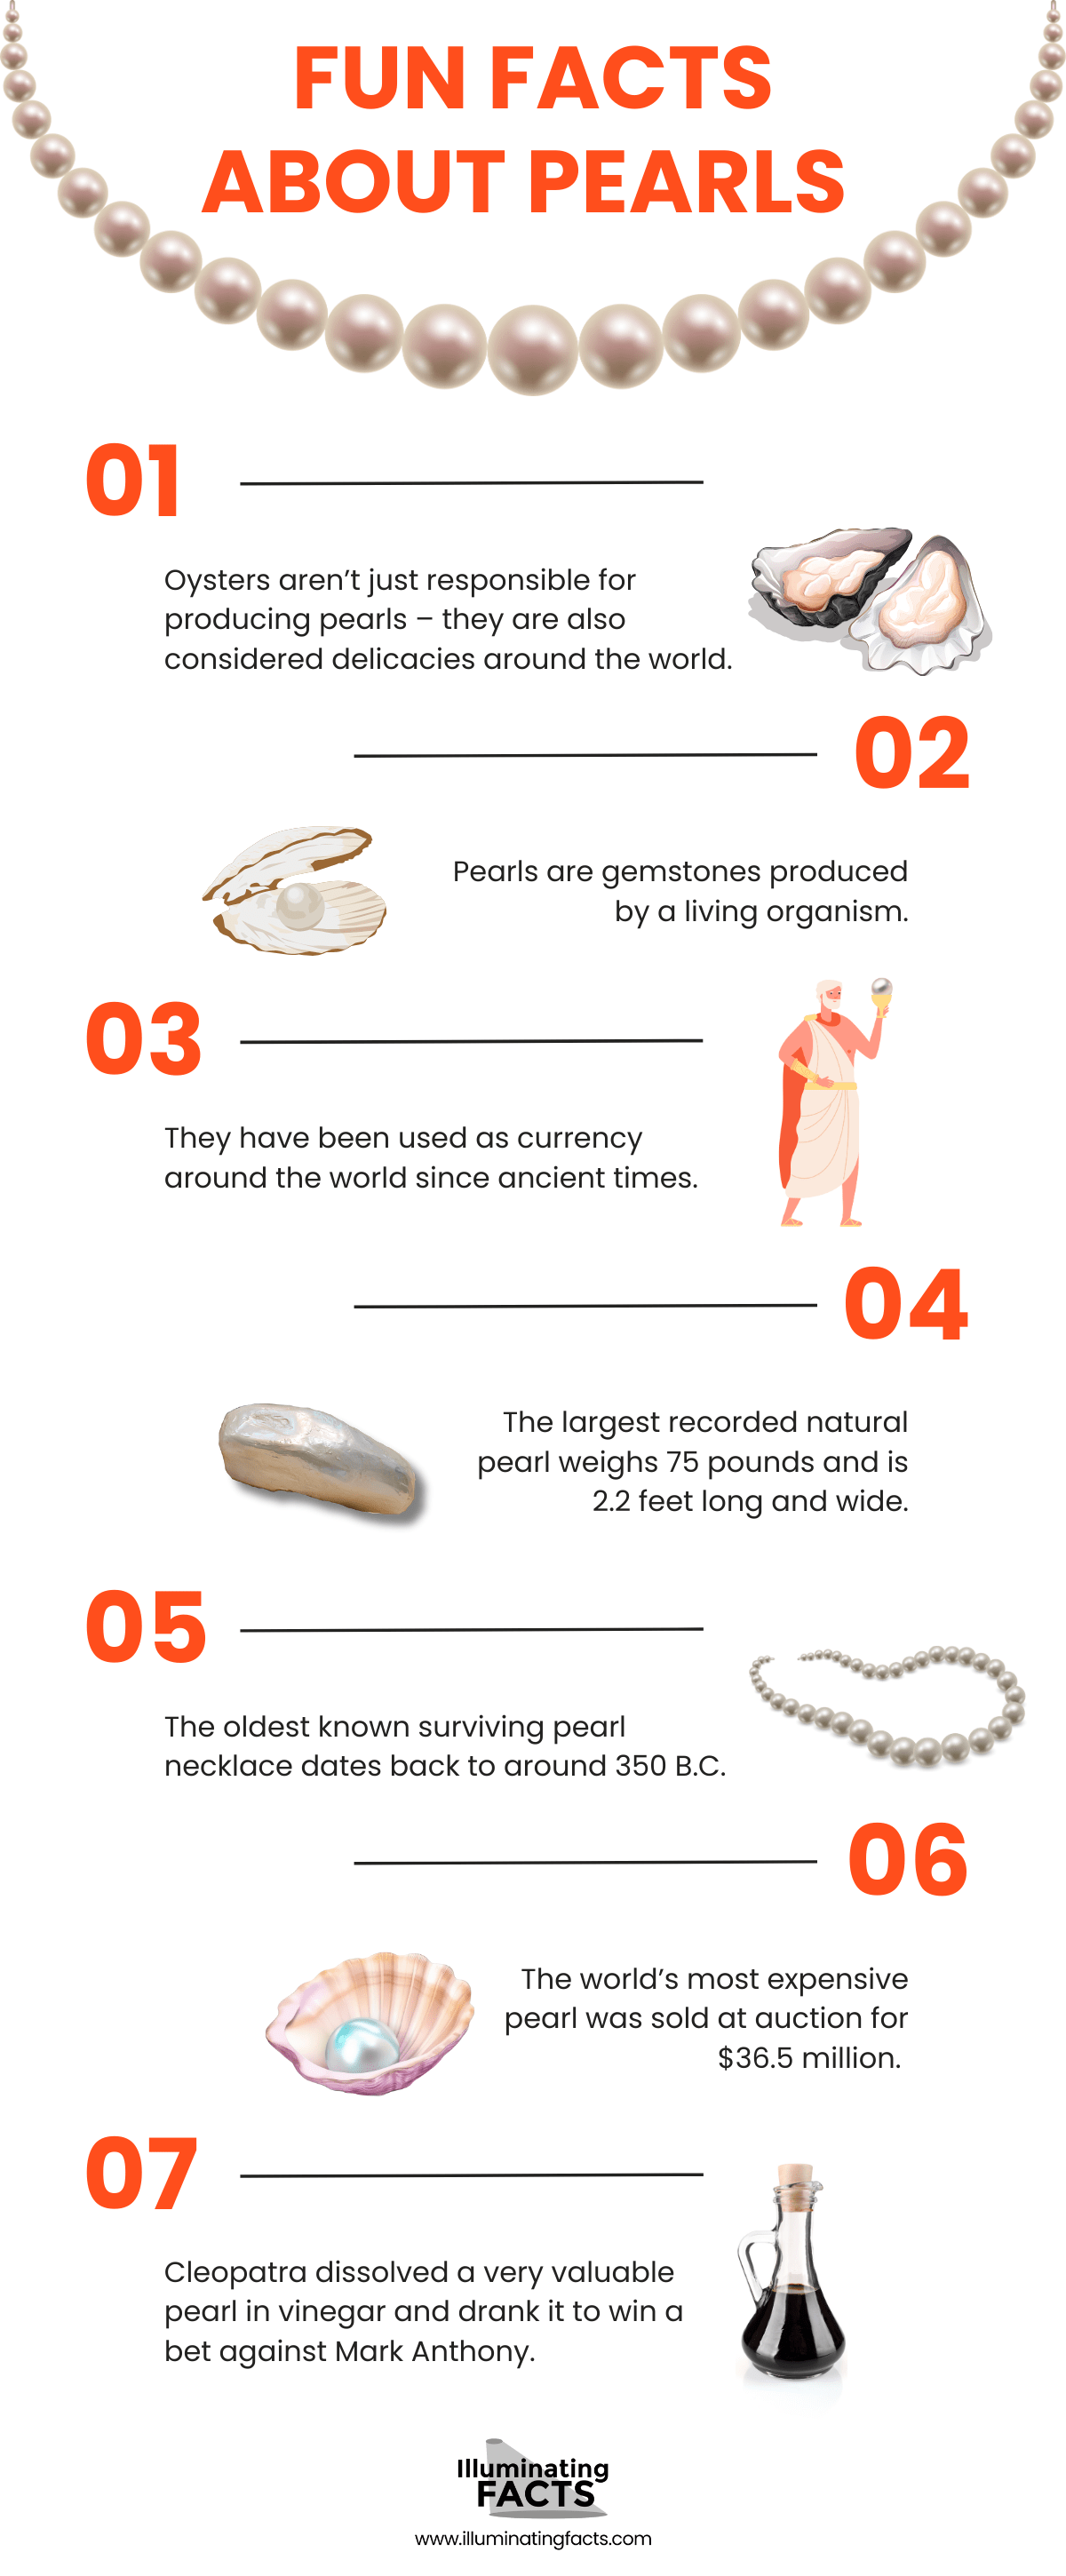 Fun Facts about pearls